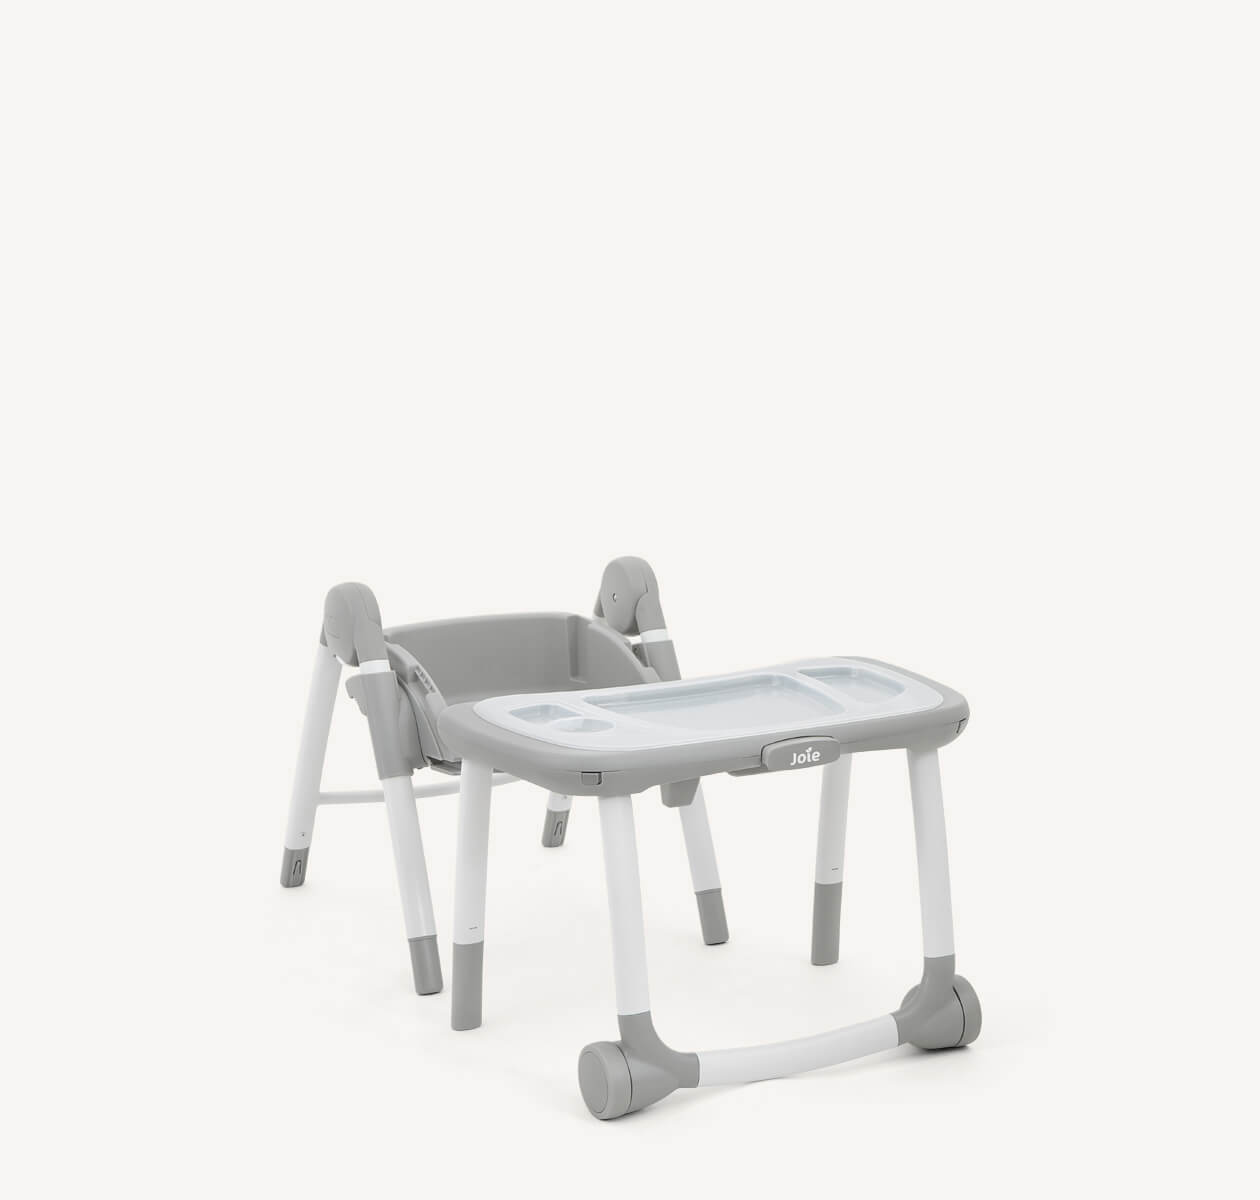 JOIE multiply™ 6in1 High Chair Portrait